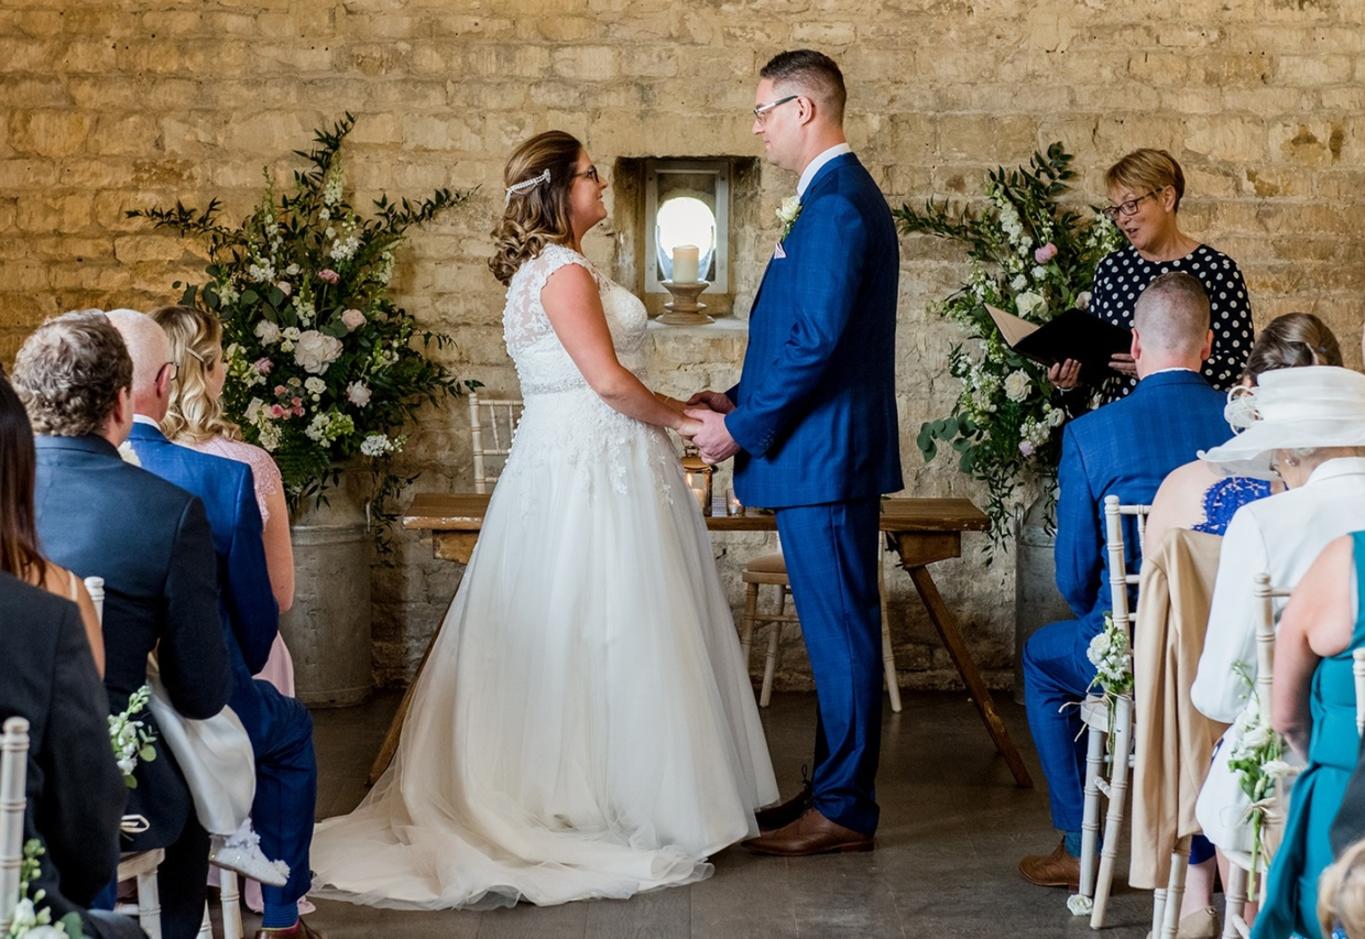 Capture Every Moment wedding photography duo from Cirencester reportage and traditional photographers Lapstone Barn Chipping Campden Cotswolds venue taking their vowels saying I do